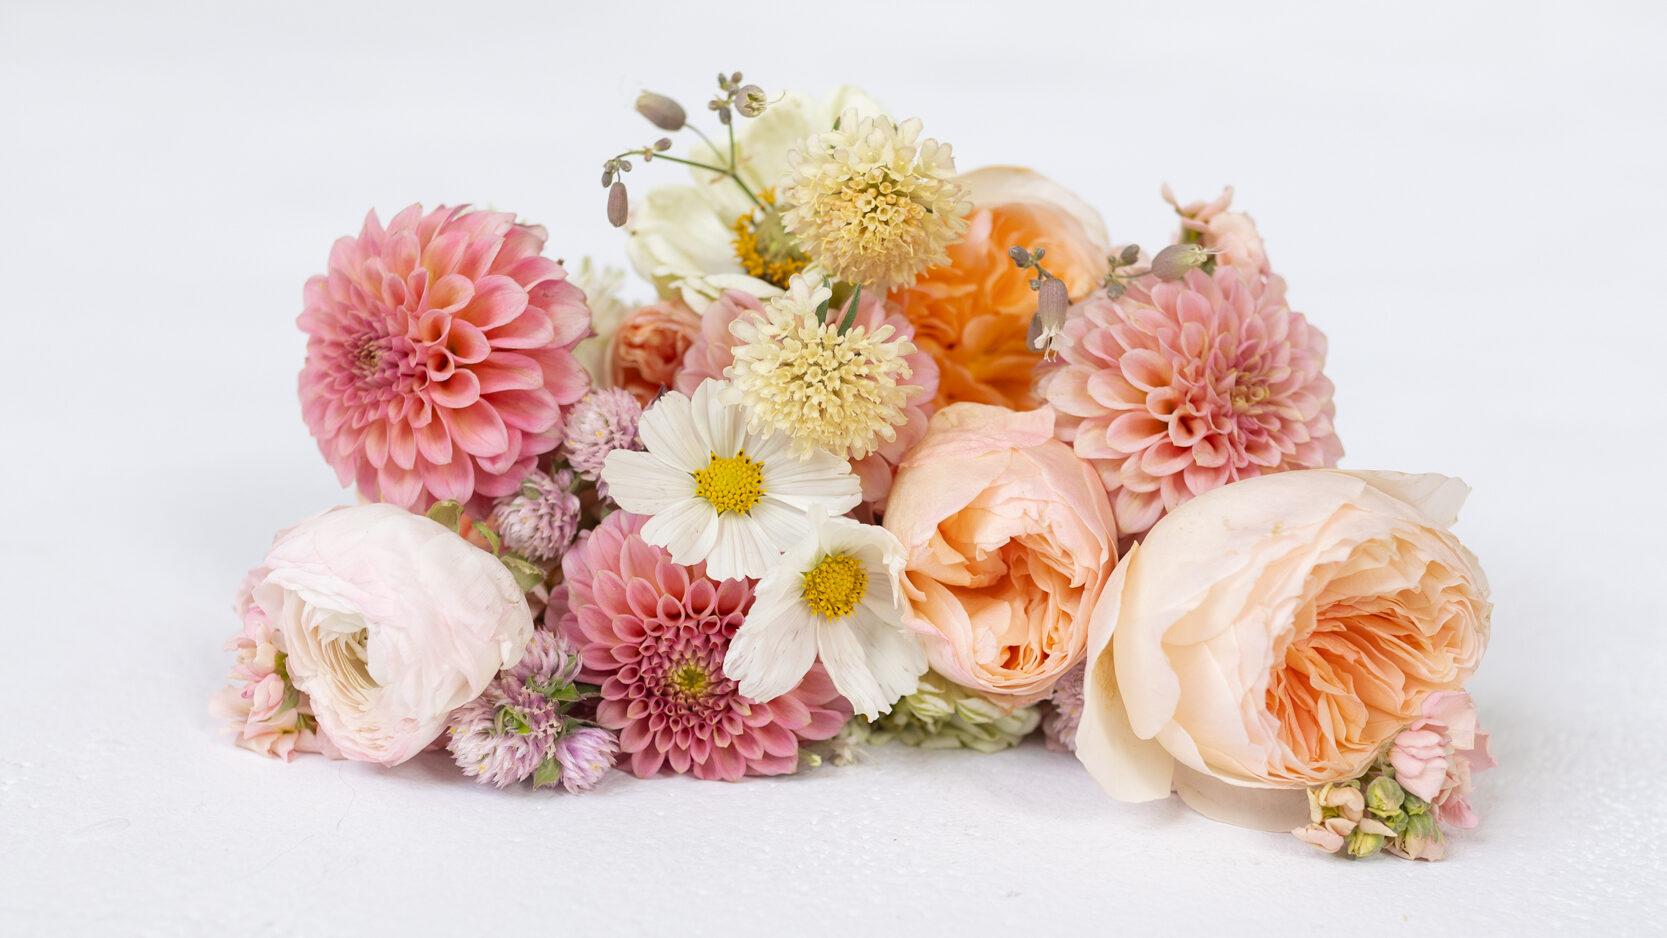 A colorful bouquet with pink, white, and peach-colored flowers.